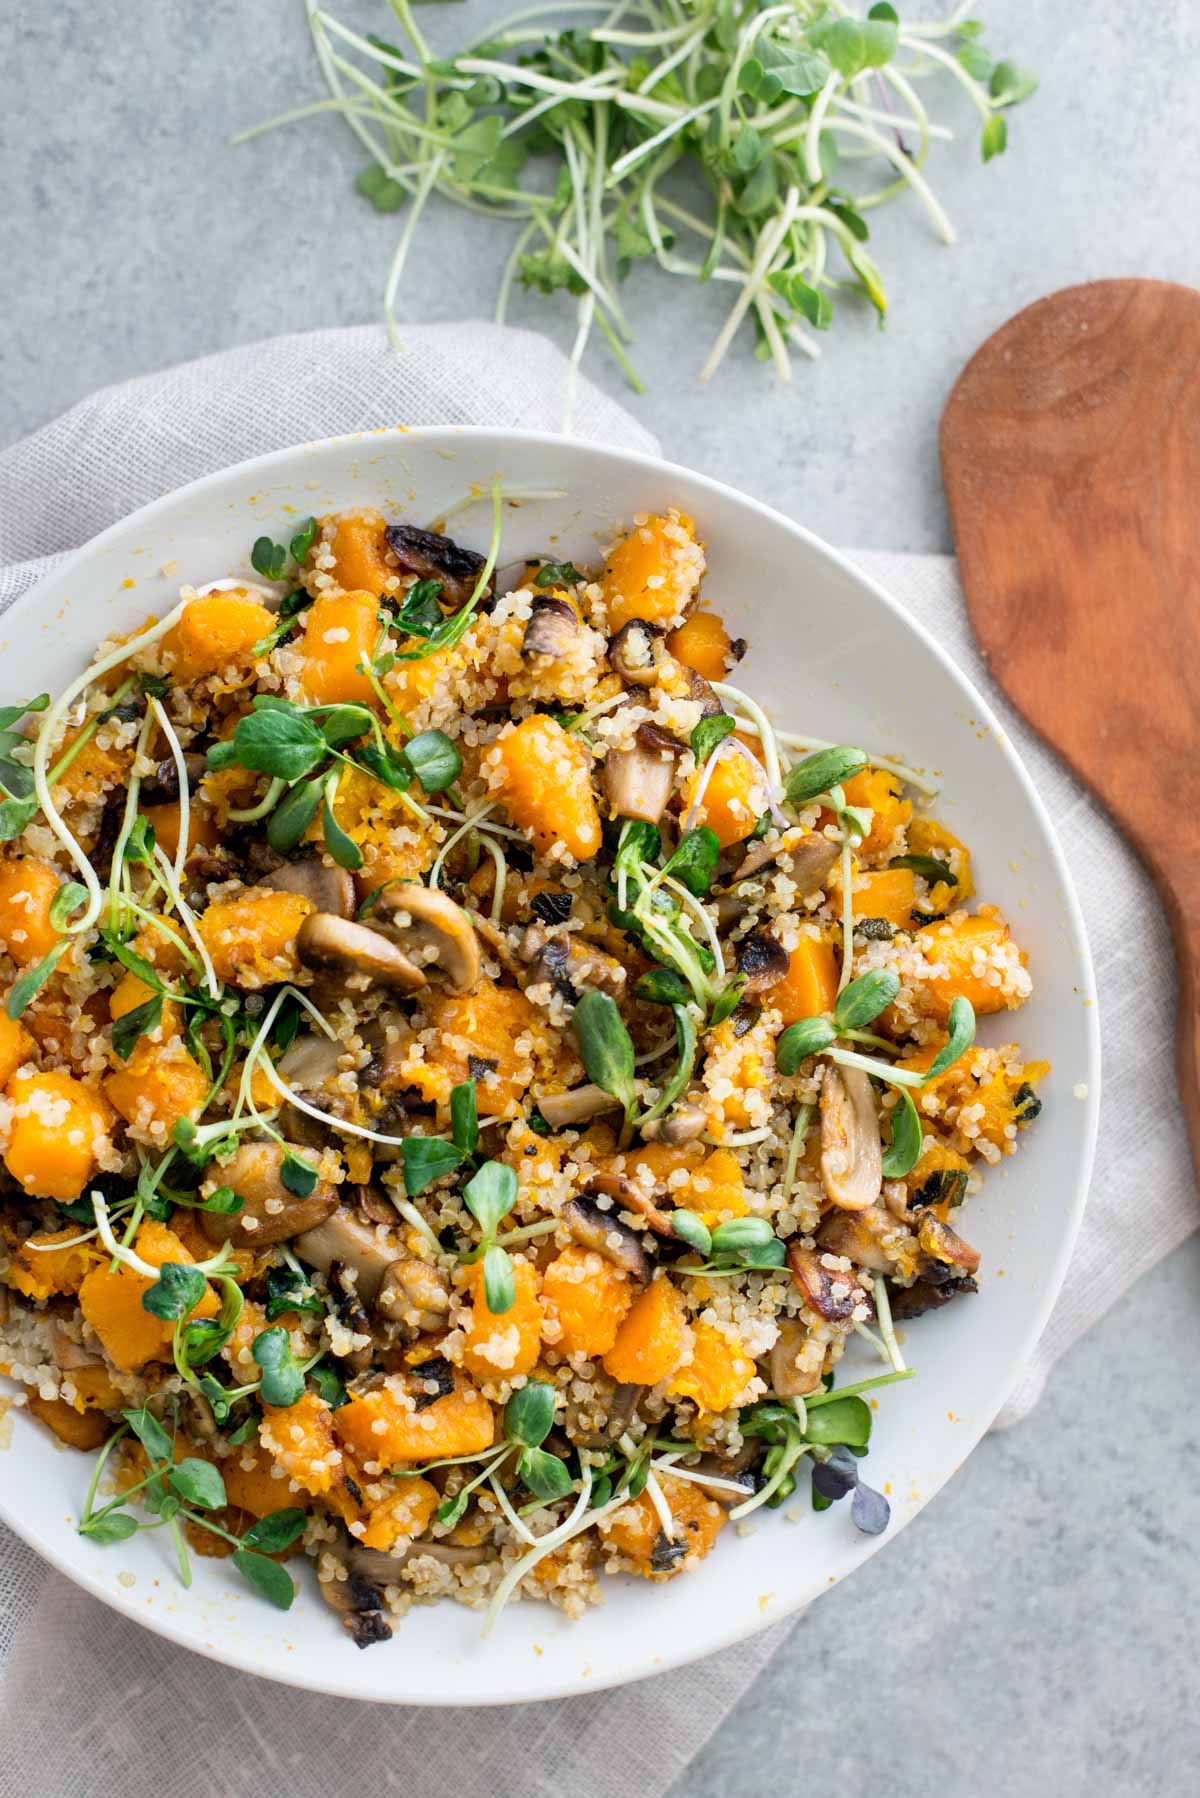 Did you know you shouldn't eat cold salads and smoothies during the fall and winter? Learn more and this delicious recipe for a warm butternut squash salad